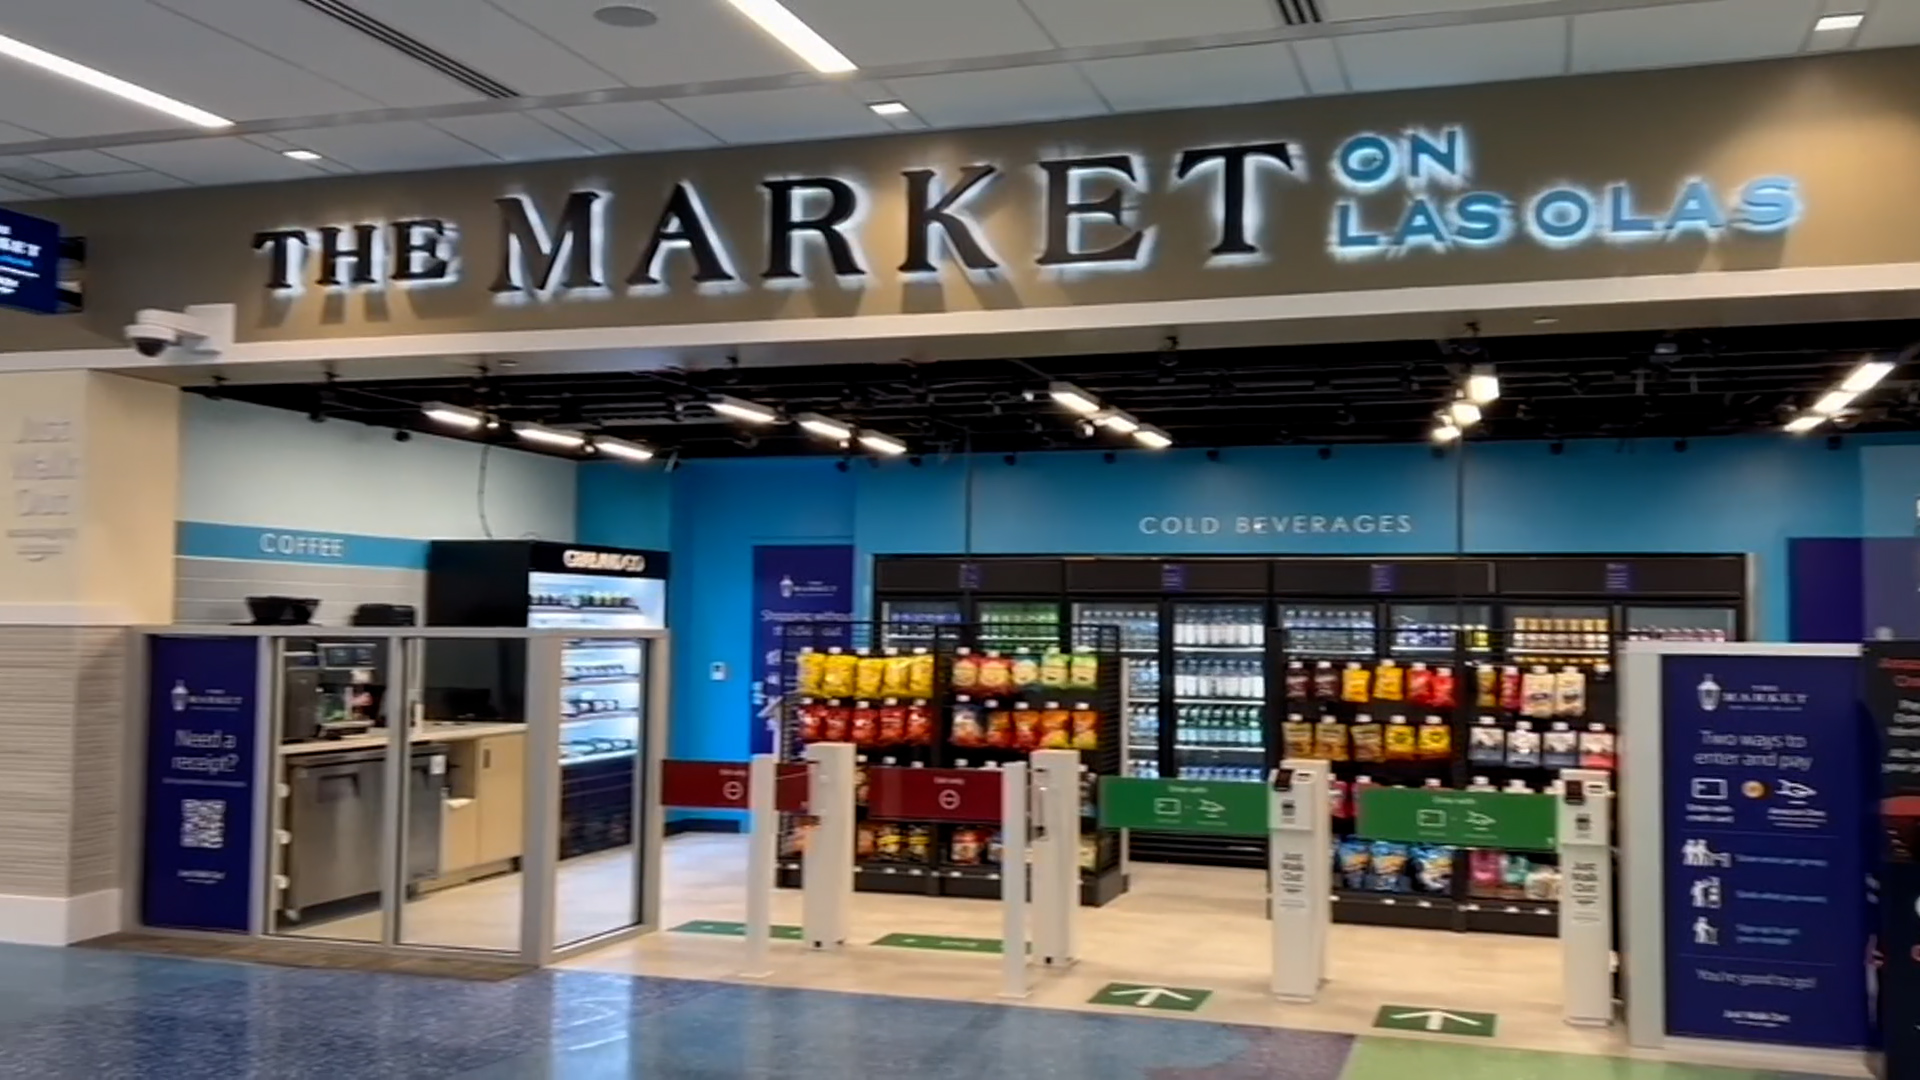 NBC 6 South Florida Reviews on Fort Lauderdale Airport’s New “Checkout-Free” Retailer Powered by Amazon Know-how